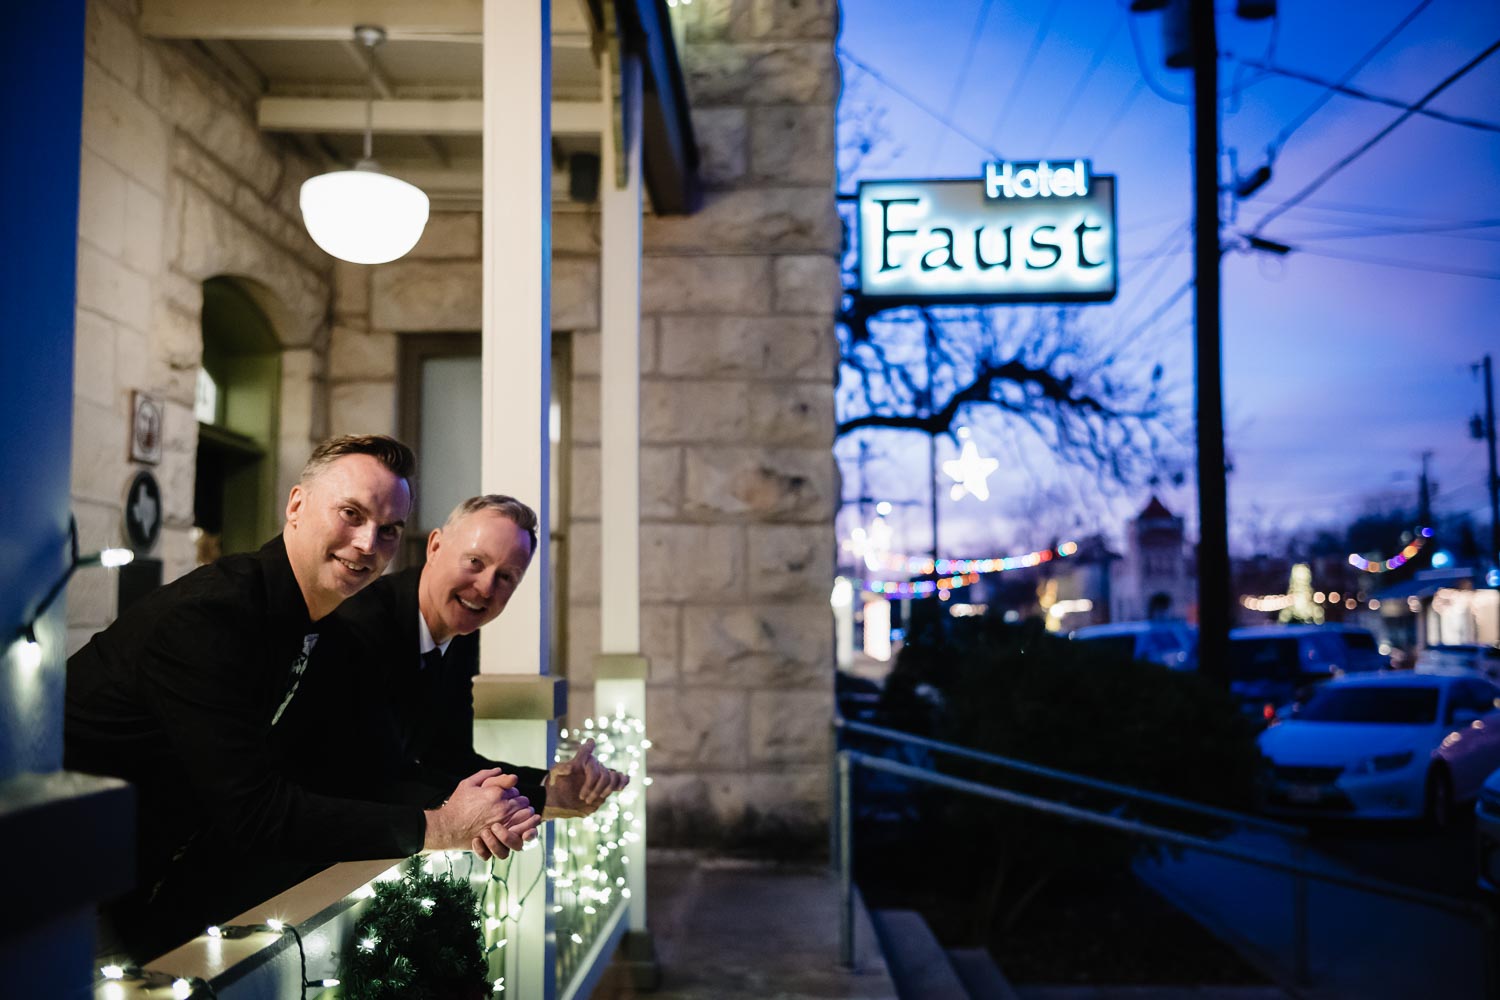 Couple on walk about pose outside Hotel Faust in Comfort Texas LM104447